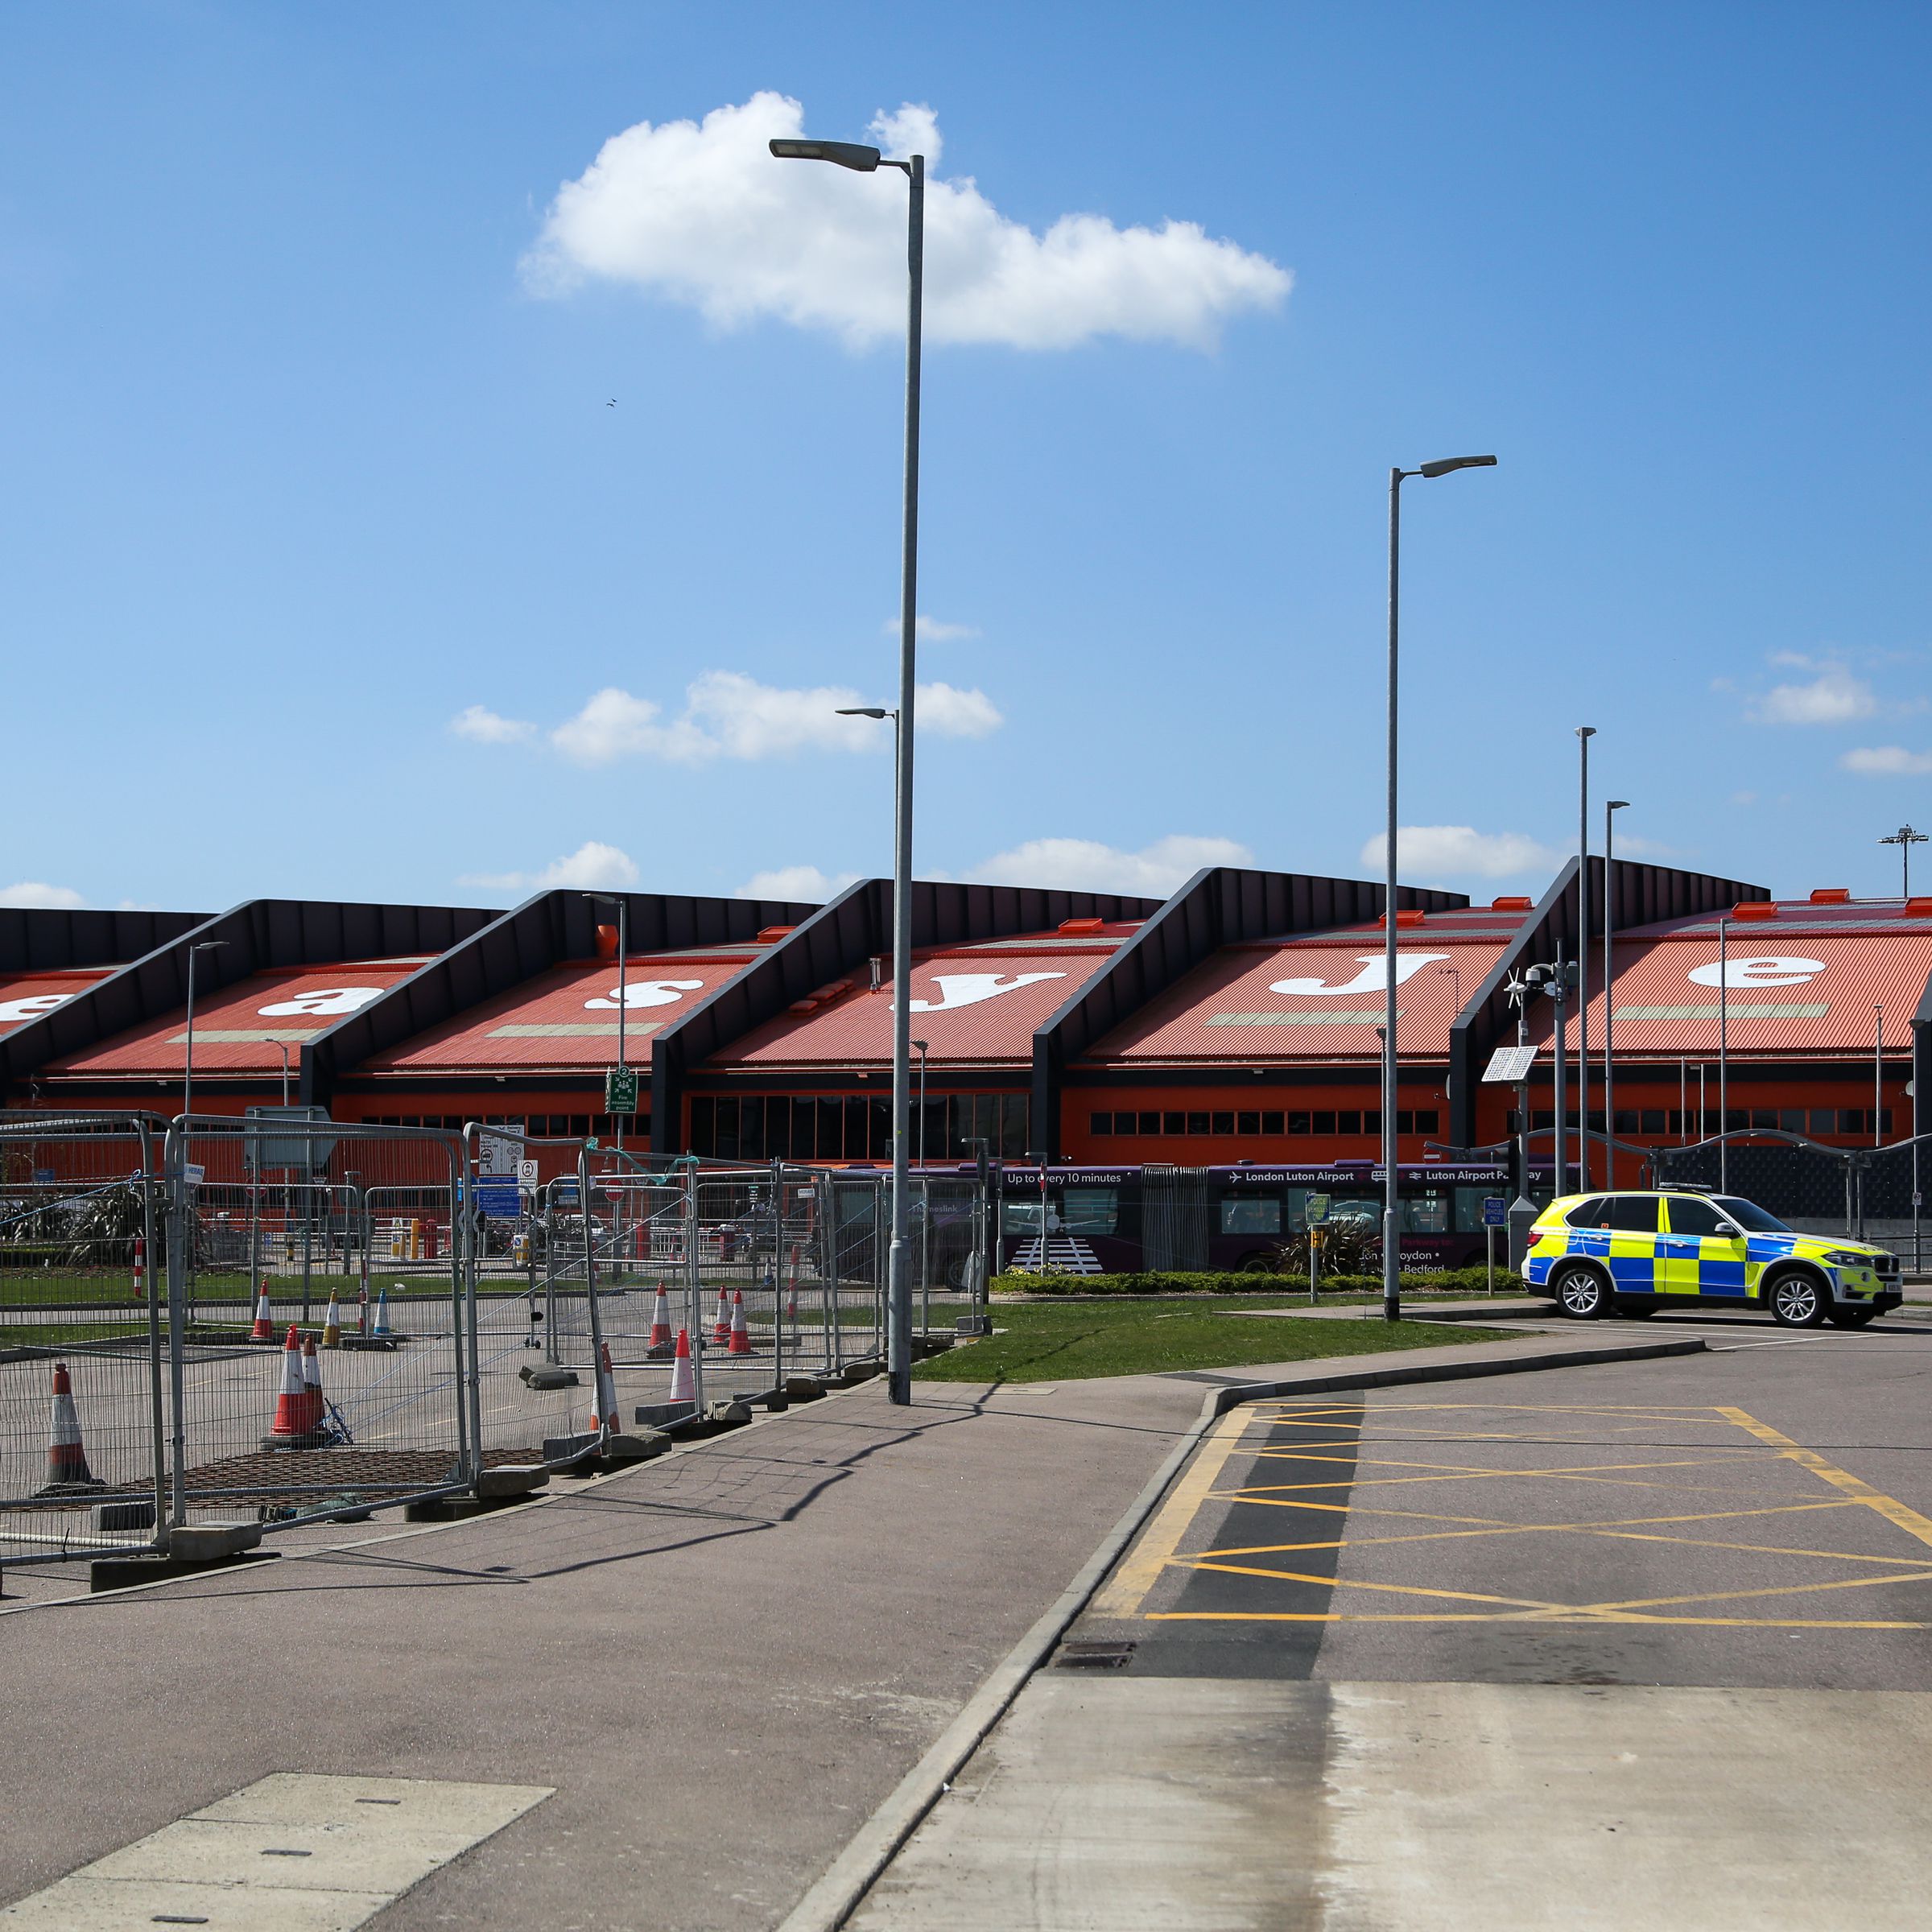 An exterior view of the entrance to the London Luton Airport...